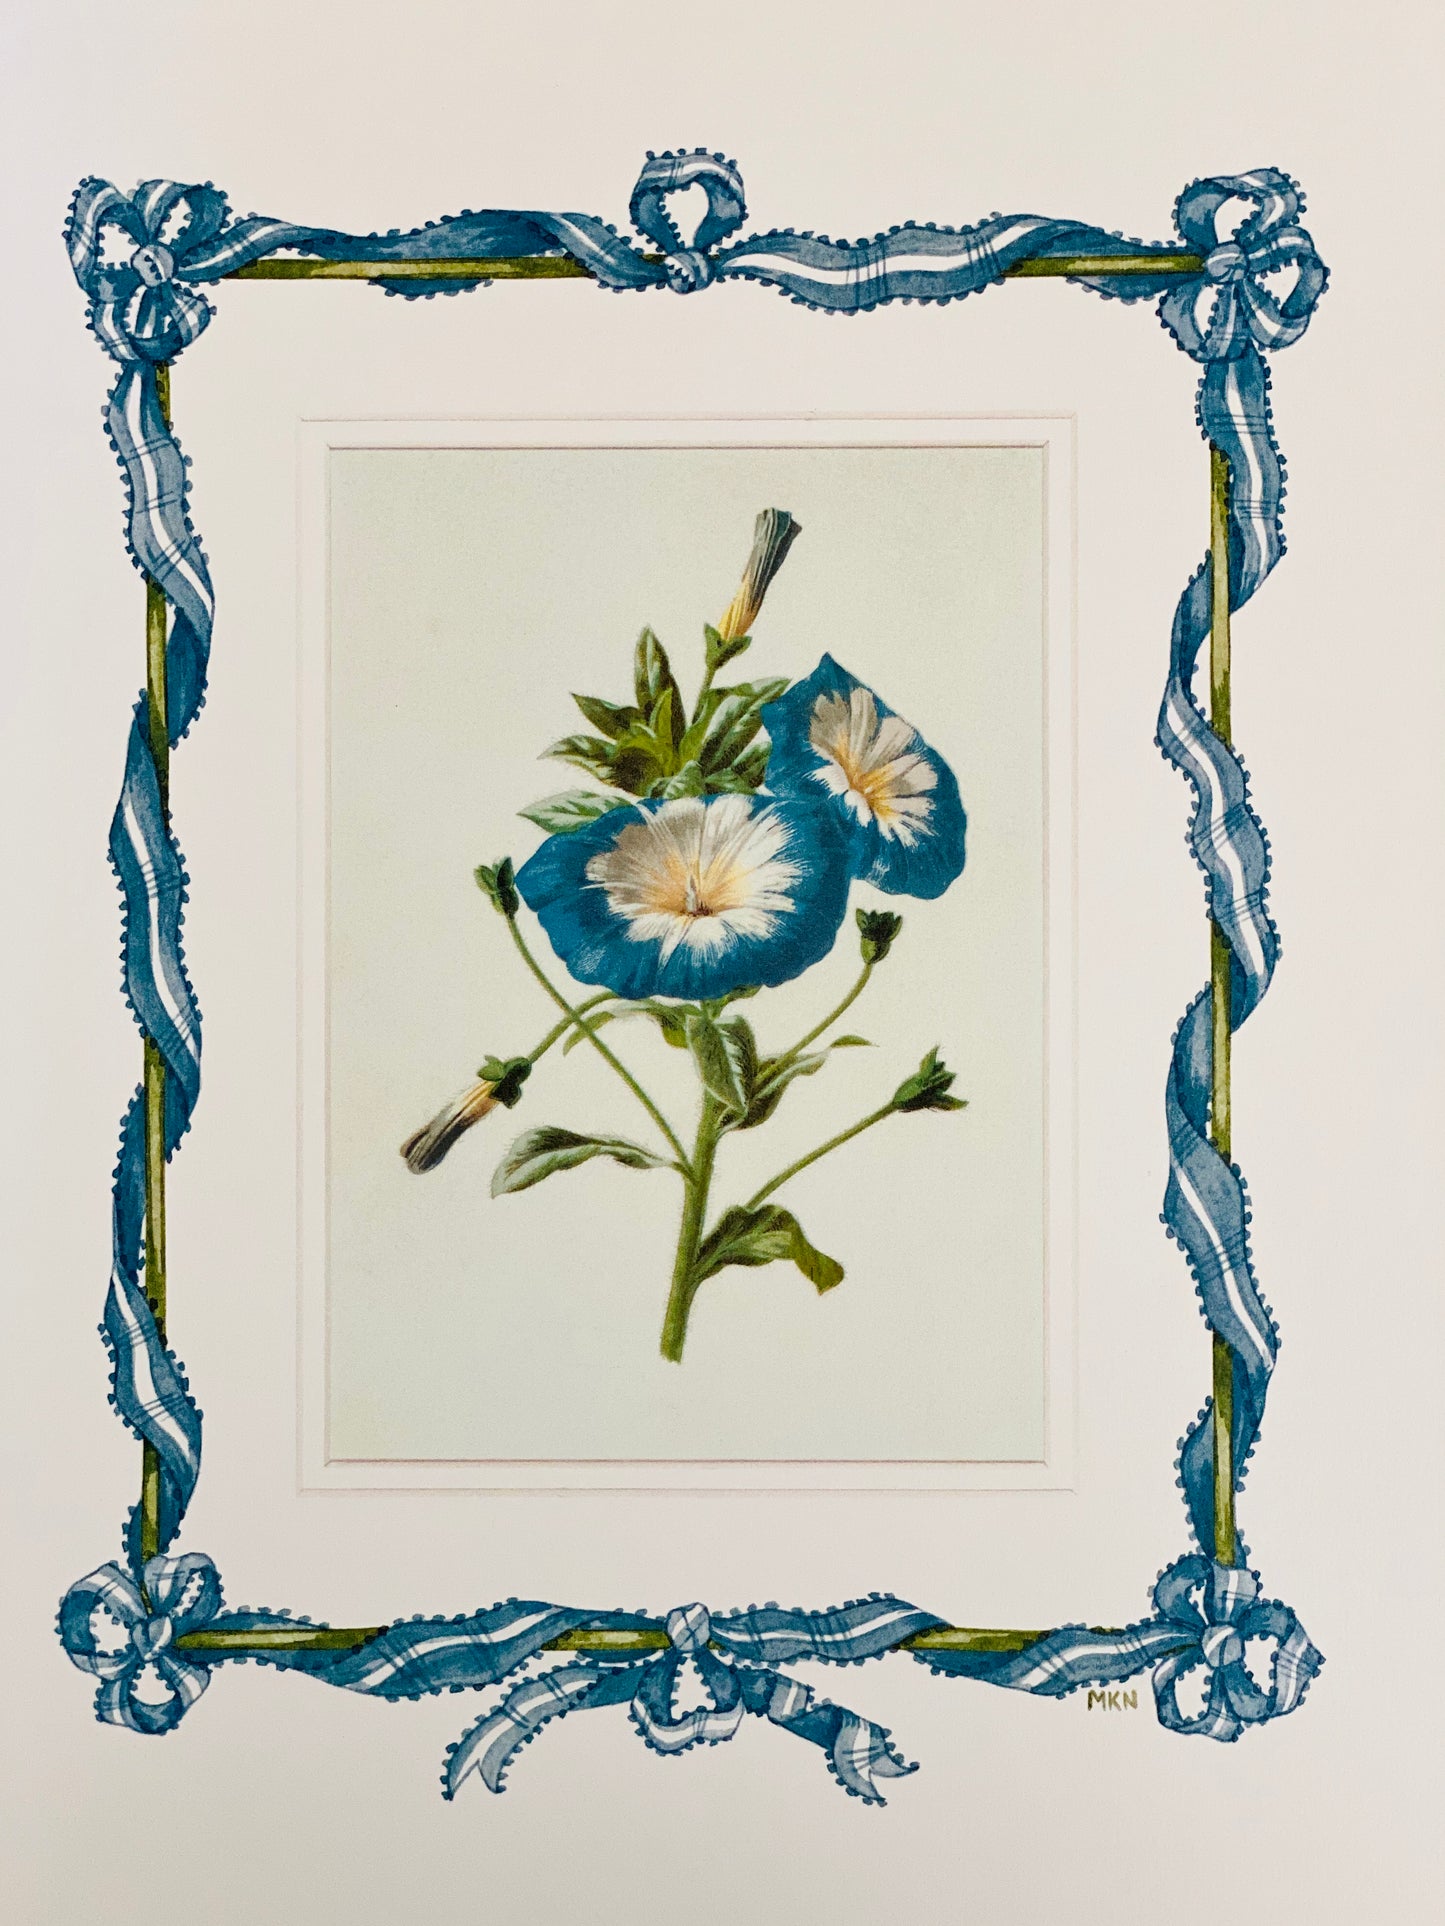 Morning Glory antique print with hand-painted ribbon border.